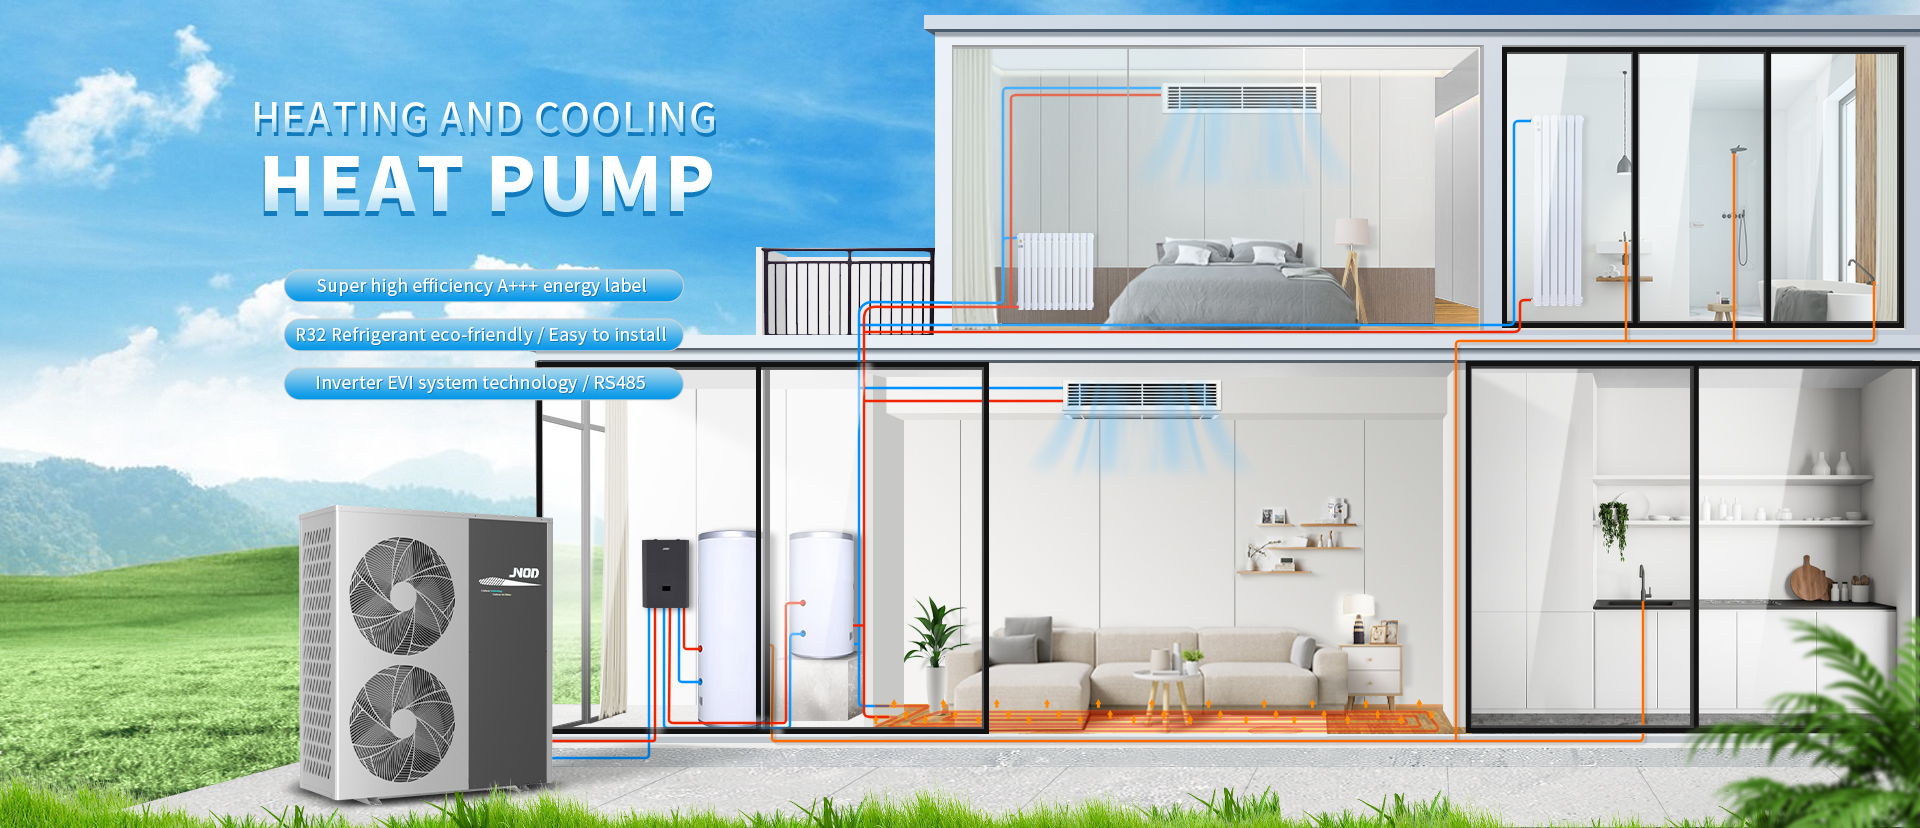 Universal Central Heating And Cooling Heat Pump